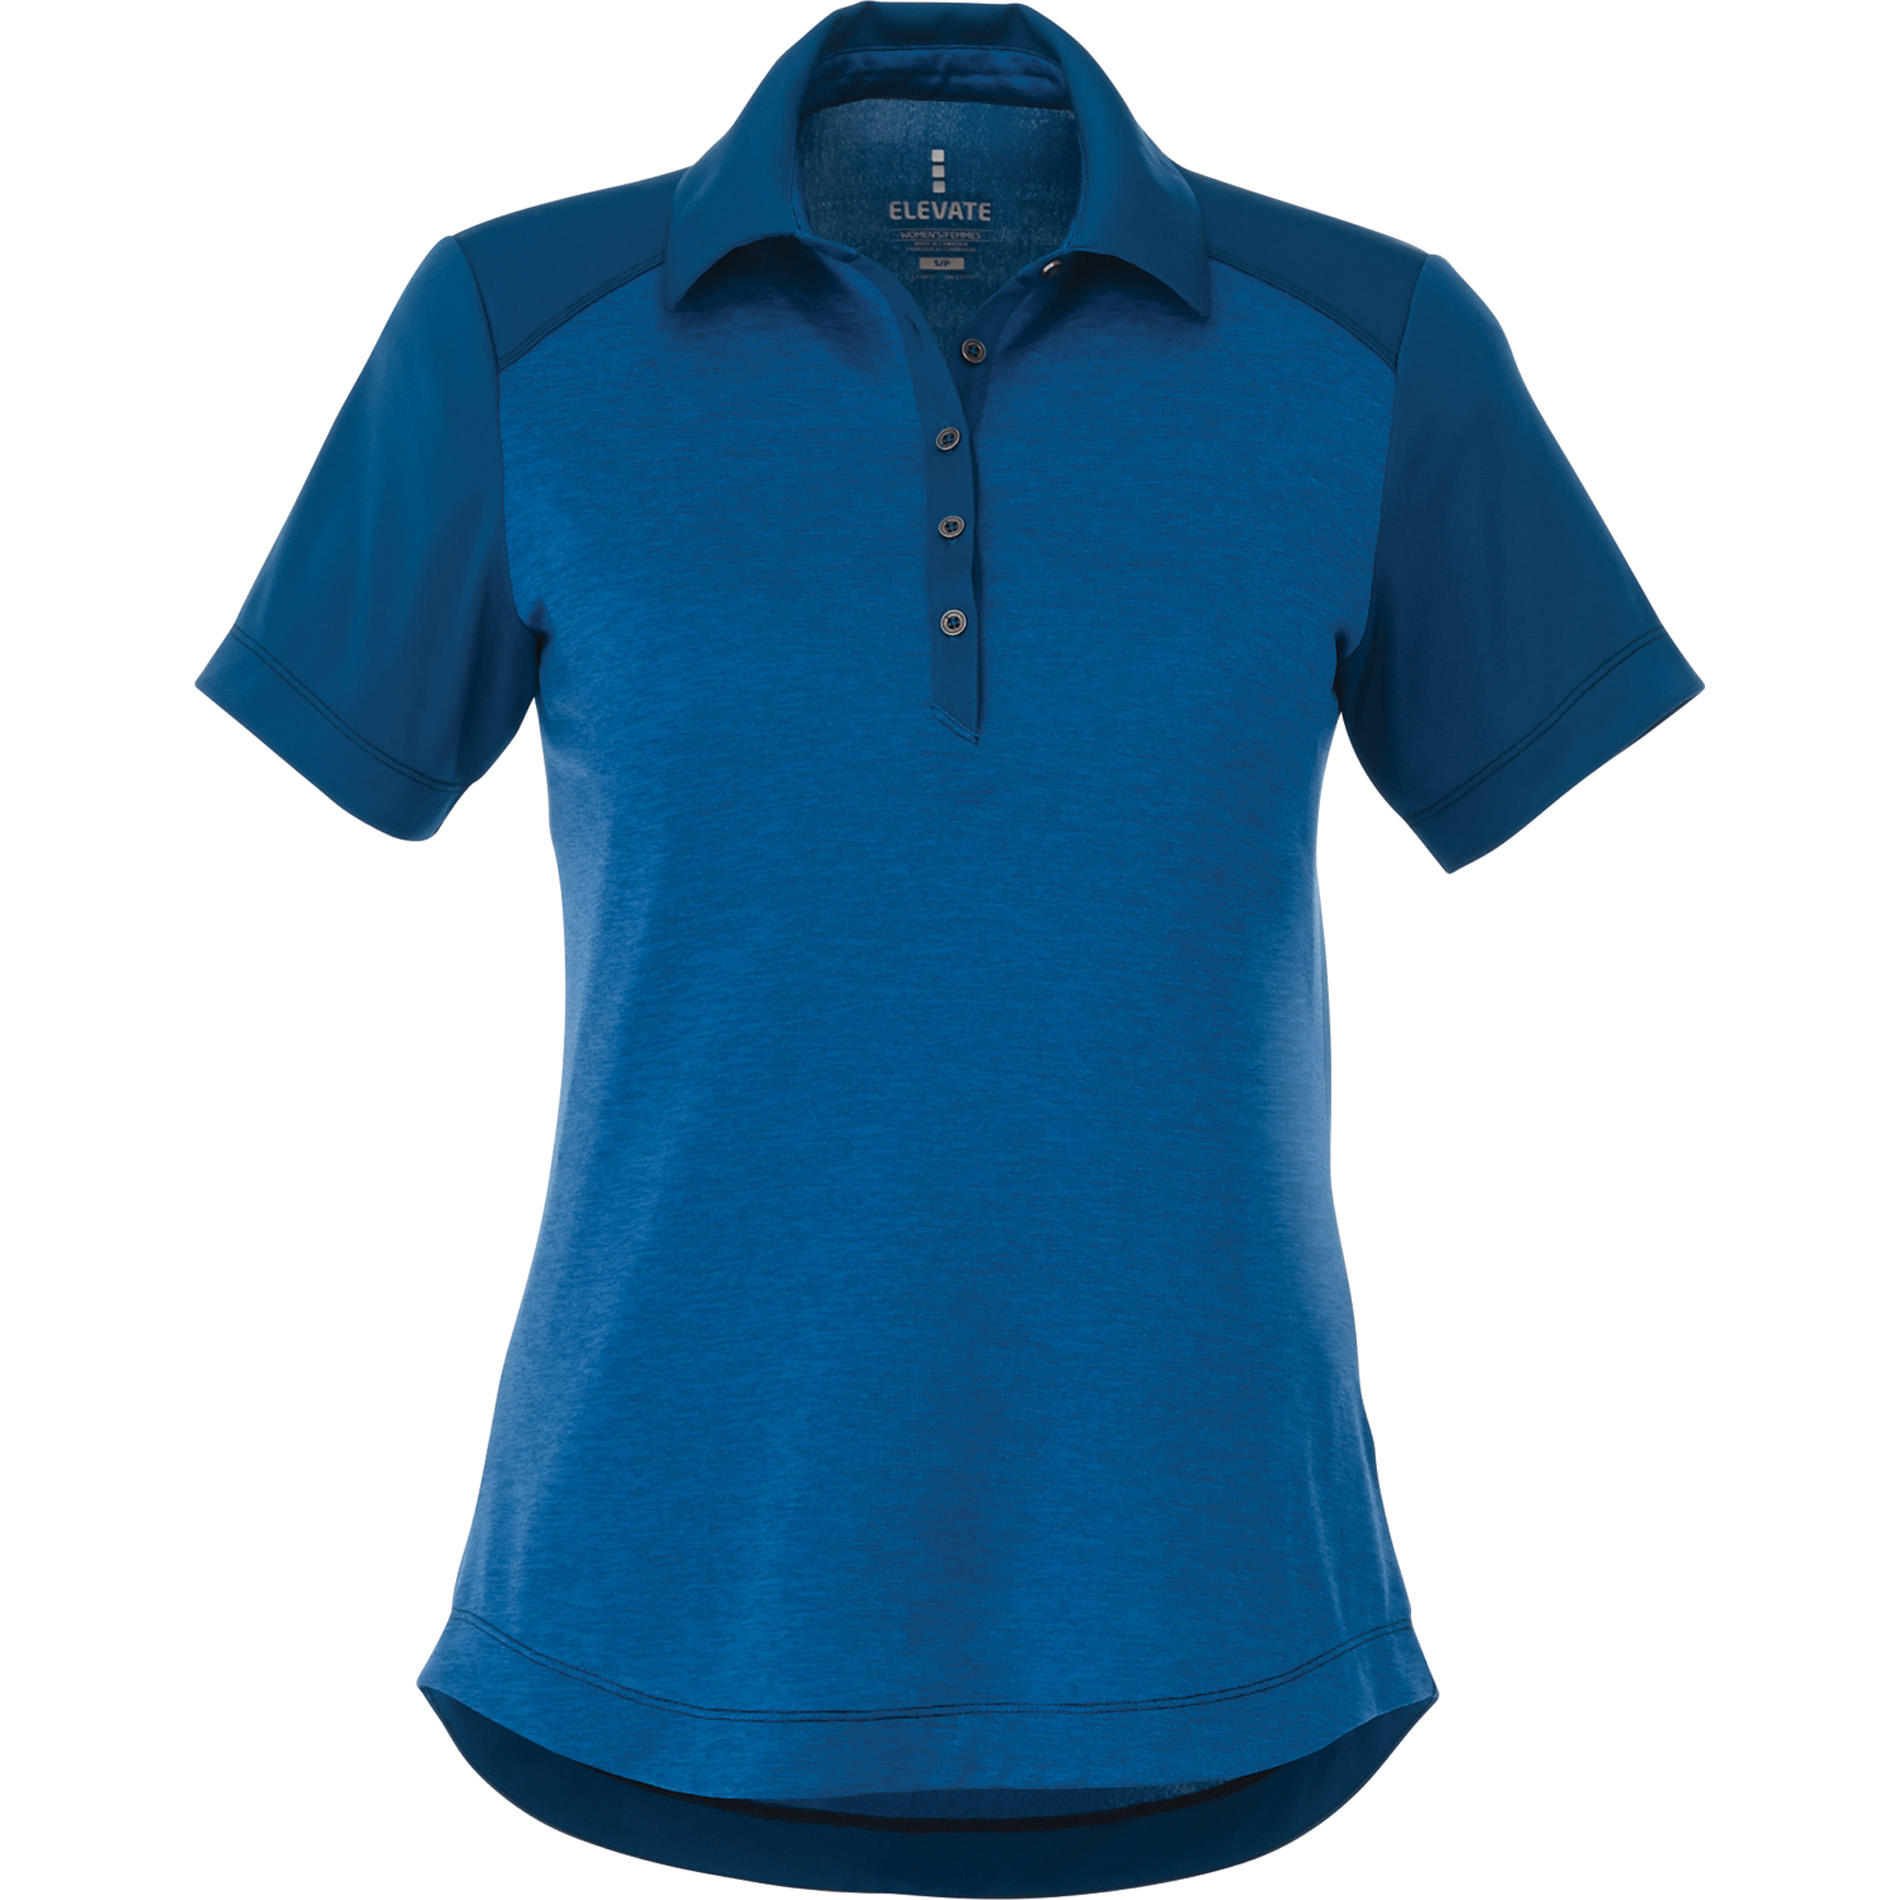 click to view Olympic Blue Heather/Invictus